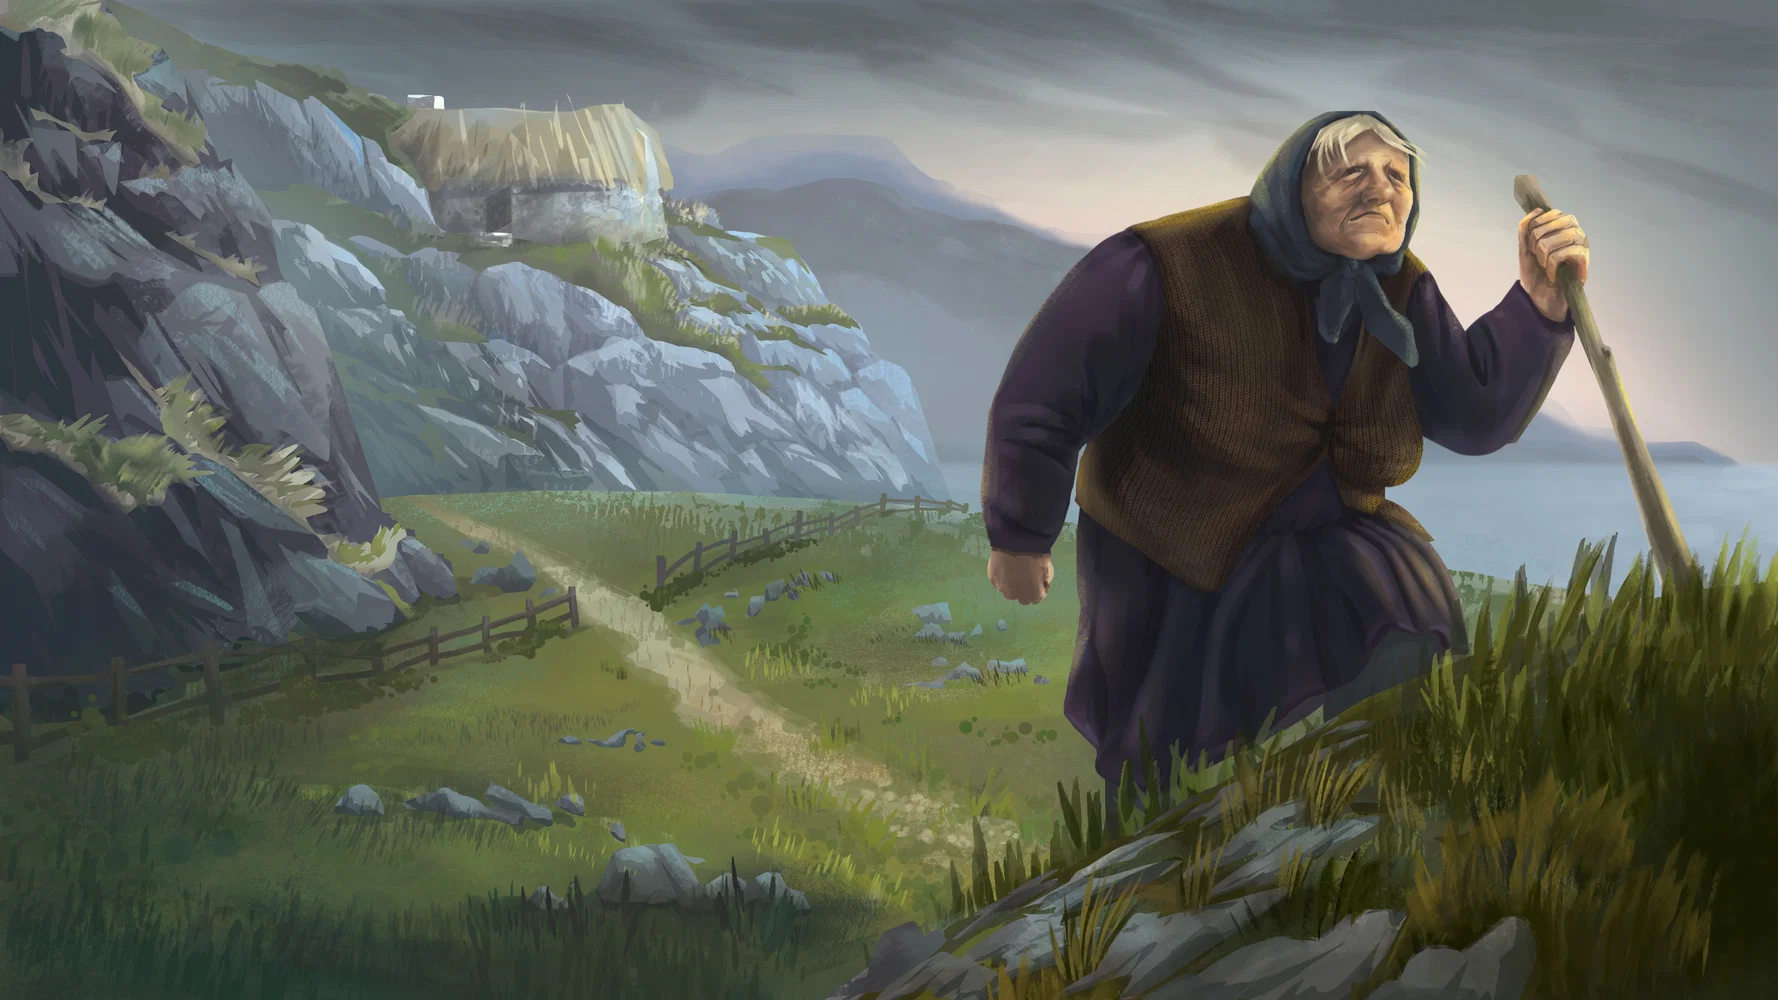 An elderly woman climbs a hill in stormy weather with a cliffside shack in the background.